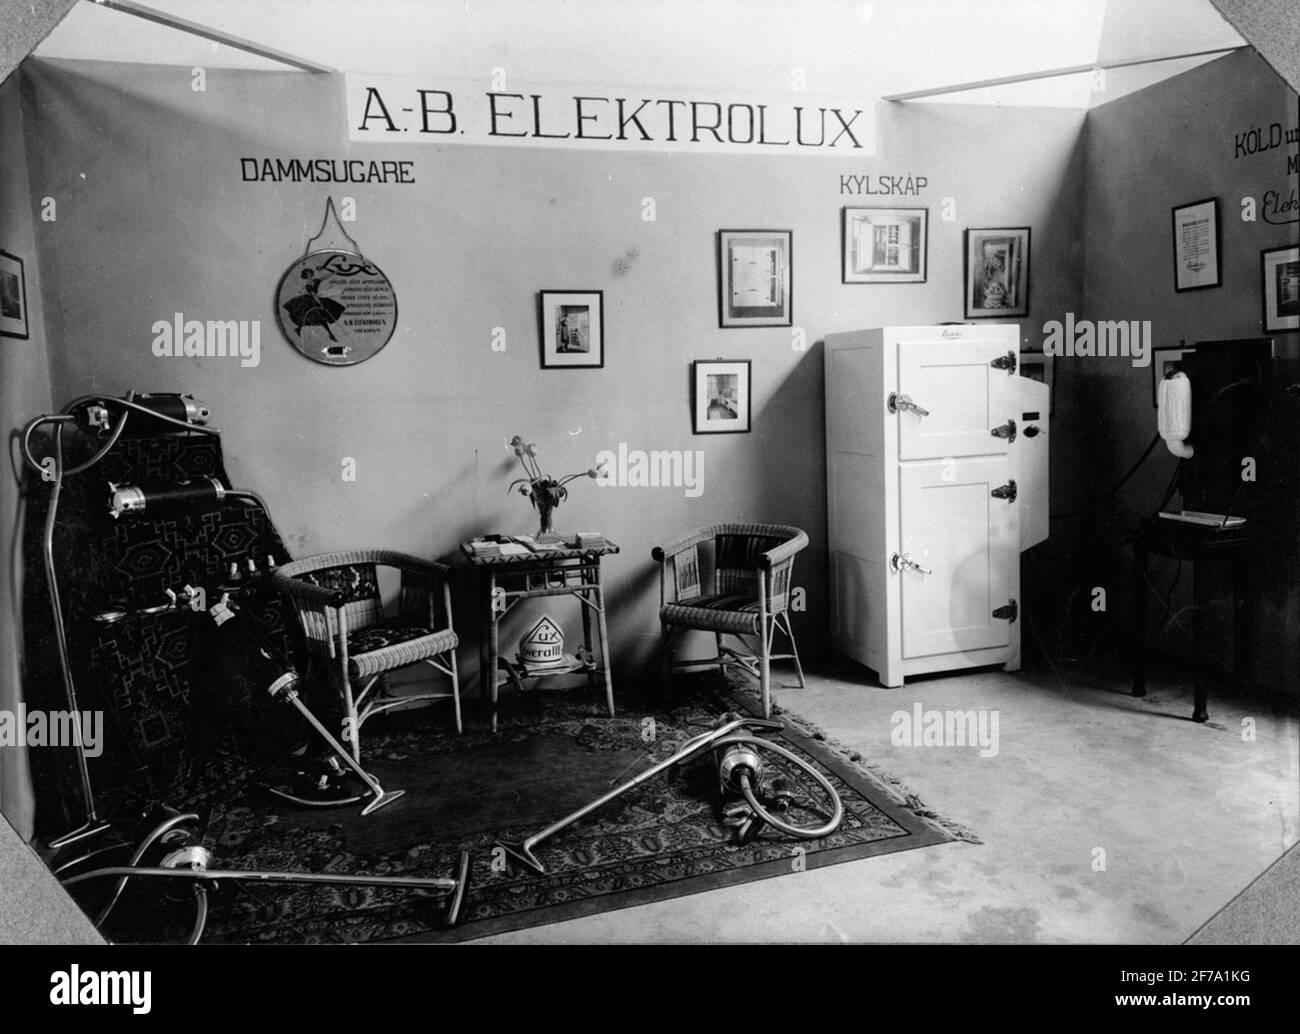 Electrolux Vacuum High Resolution Stock Photography and Images - Alamy